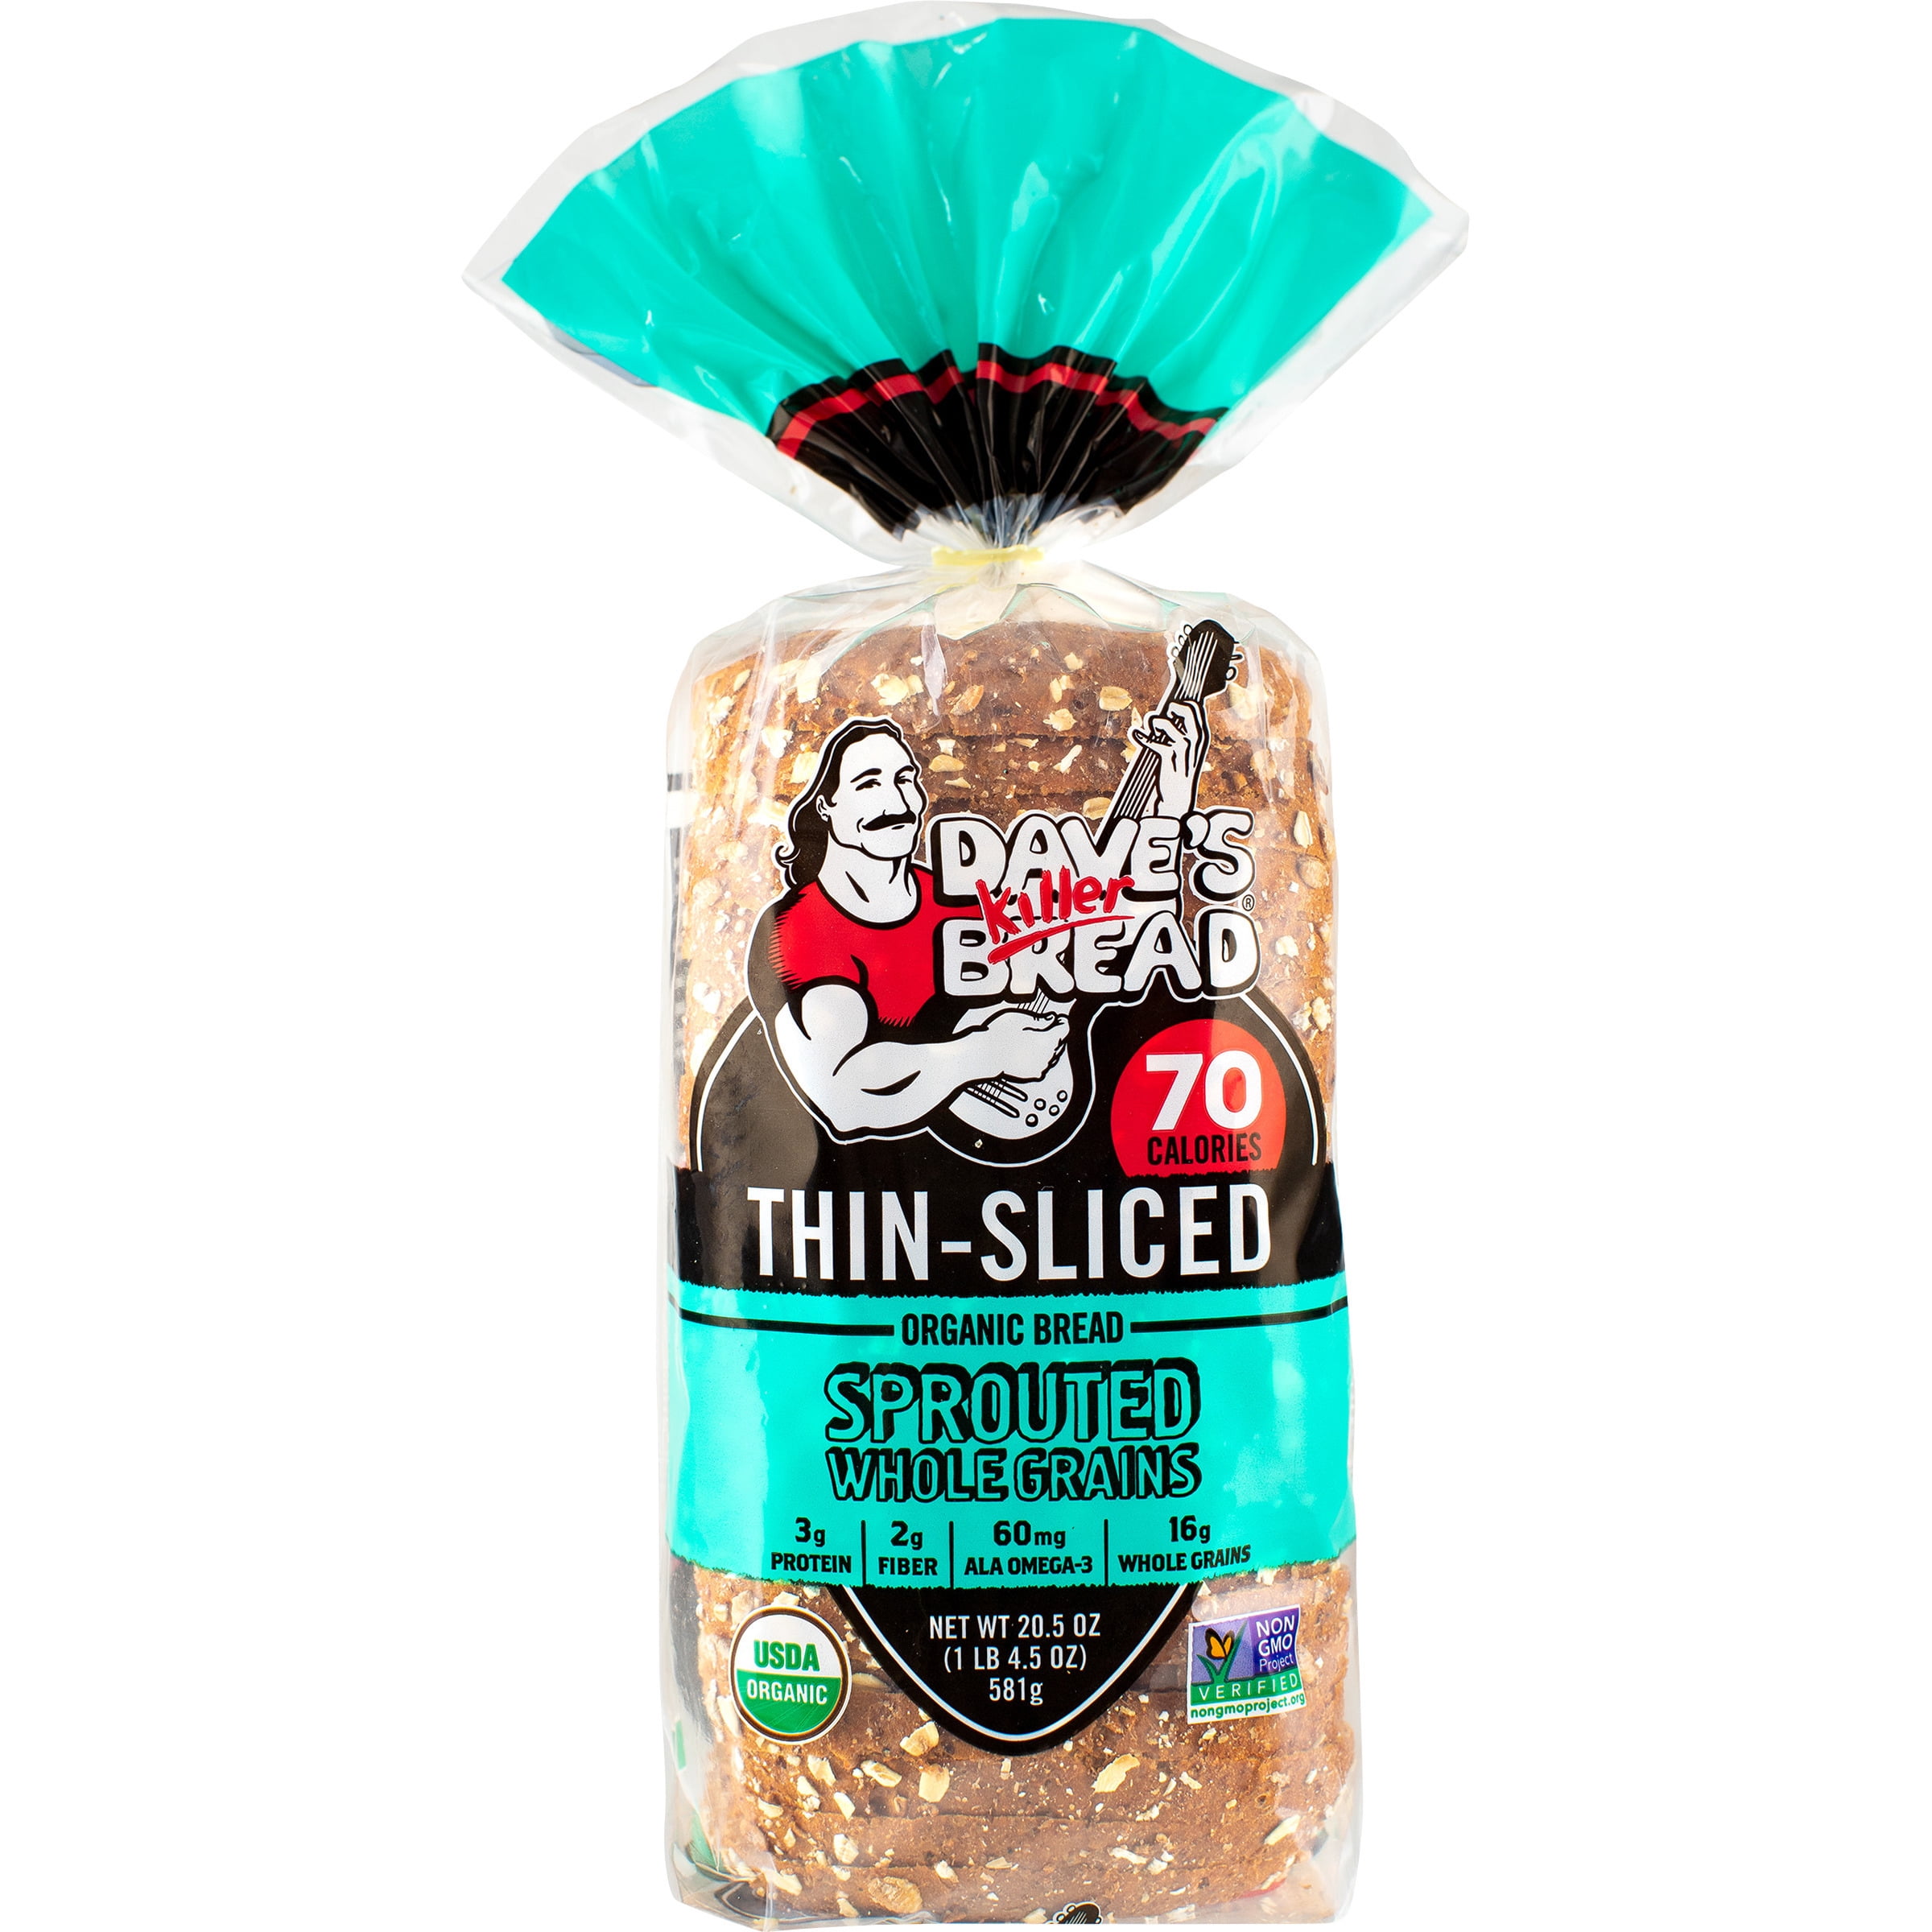 dave-s-killer-bread-sprouted-whole-grains-thin-sliced-organic-bread-20